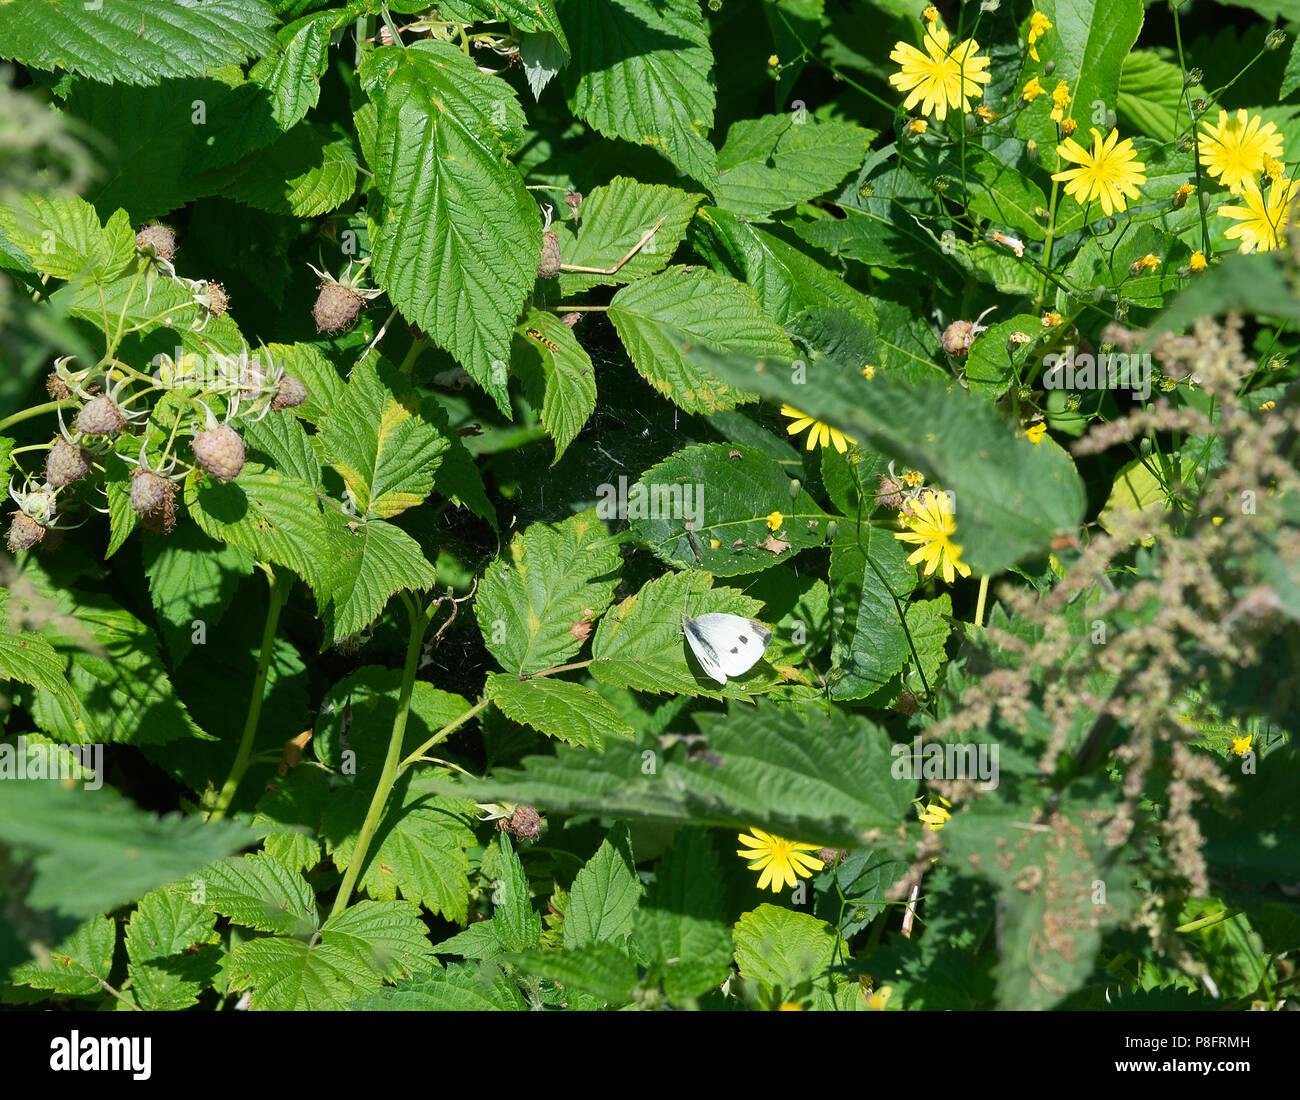 A Female Small White Butterfly Feeding on a Raspberry Bush Leaf with Fruit Ripening and Wild Goatsbeard Flowers in Morzine Haute-Savoie France Stock Photo